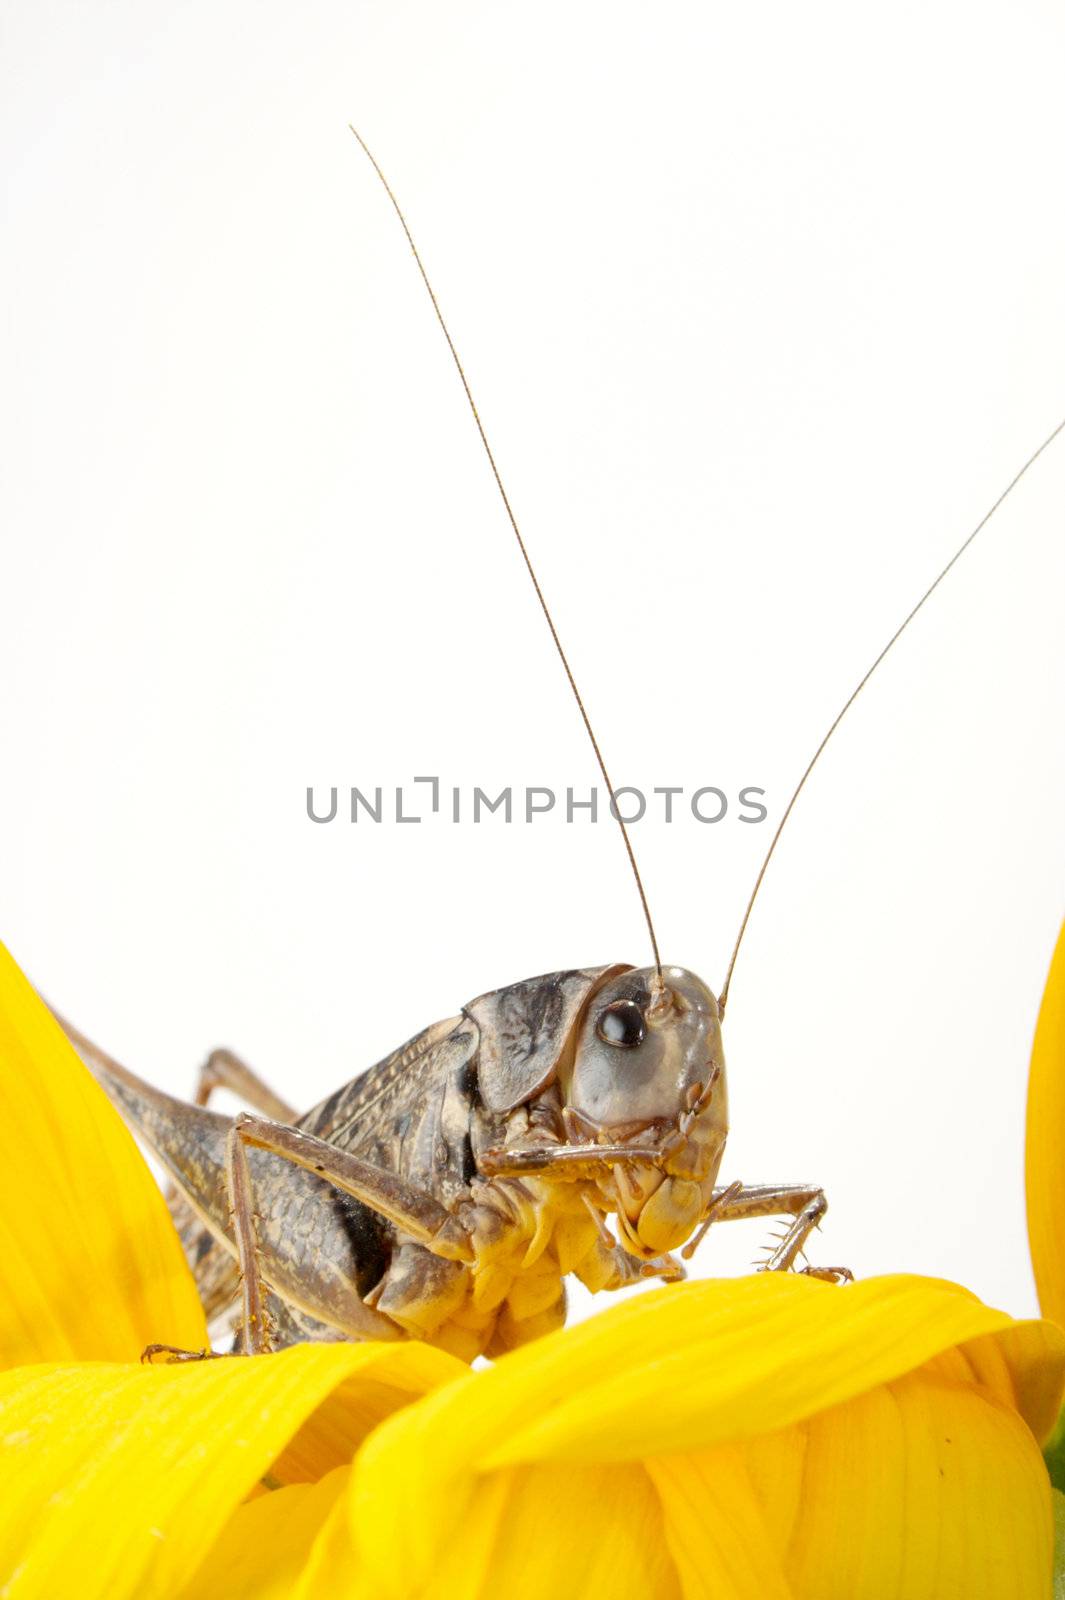 grasshoppers by Goruppa